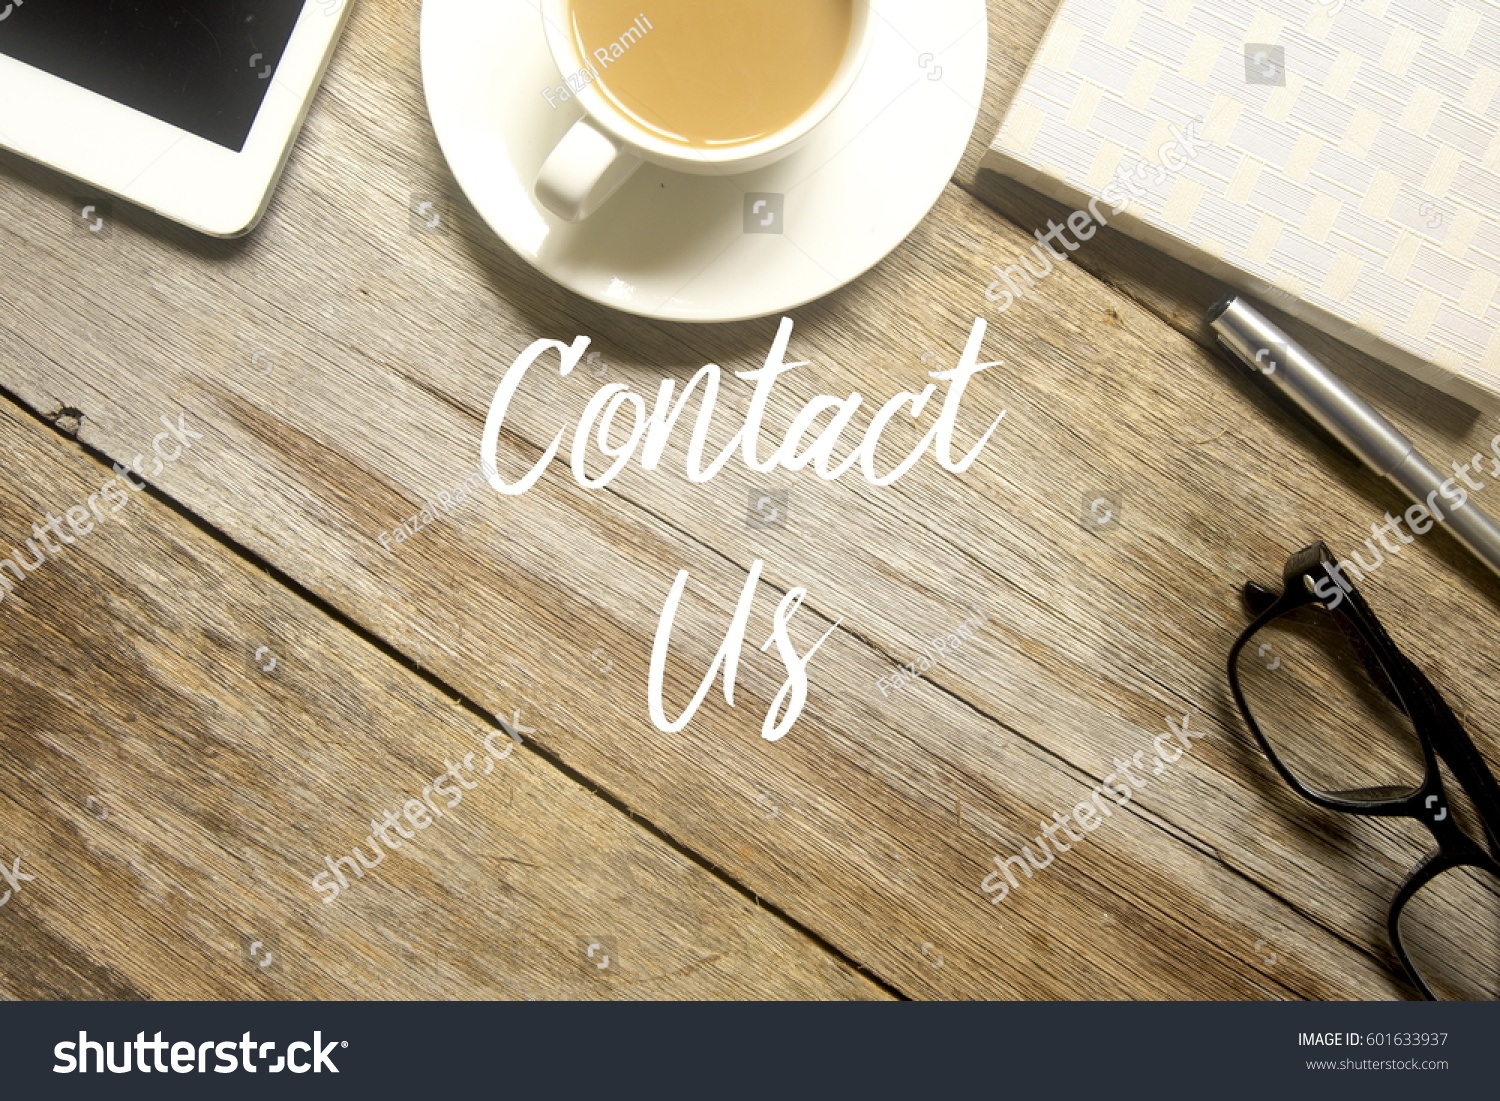 A business concept. A tablet pc, cup of coffee, glasses, pen and notebook with CONTACT US written on wooden table. #601633937